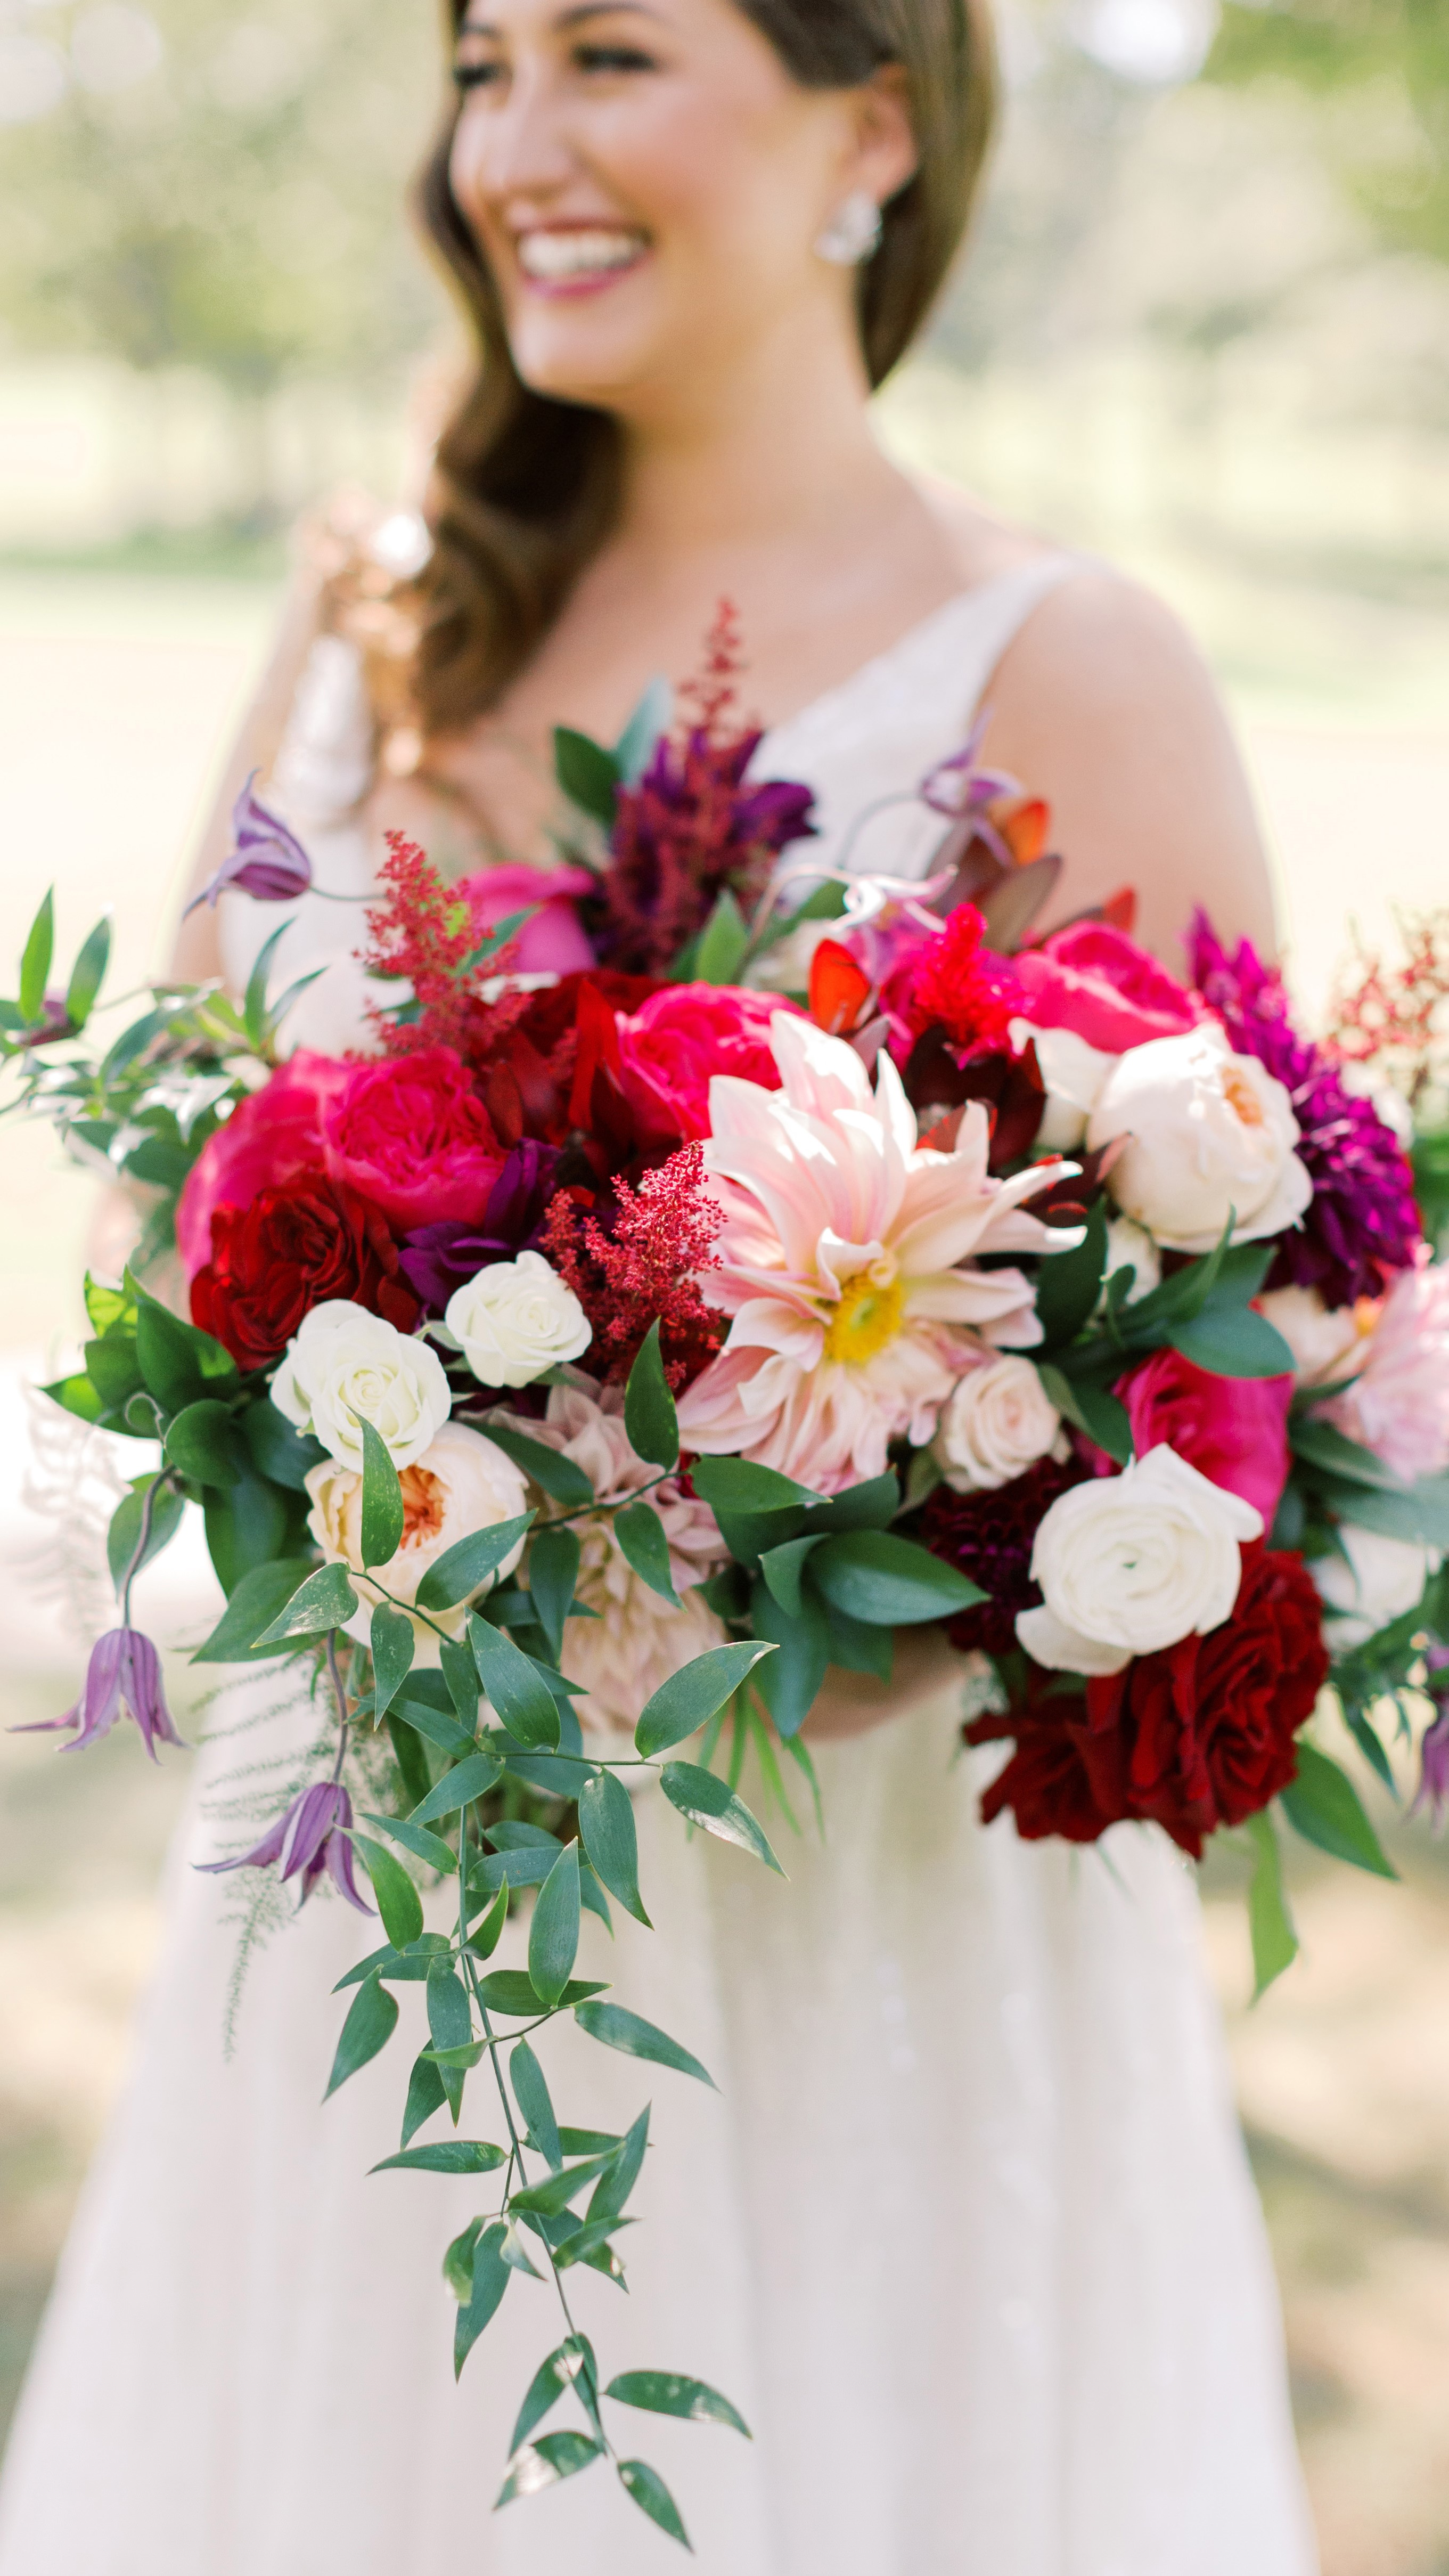 Bridal bouquet with dahlias and garden roses